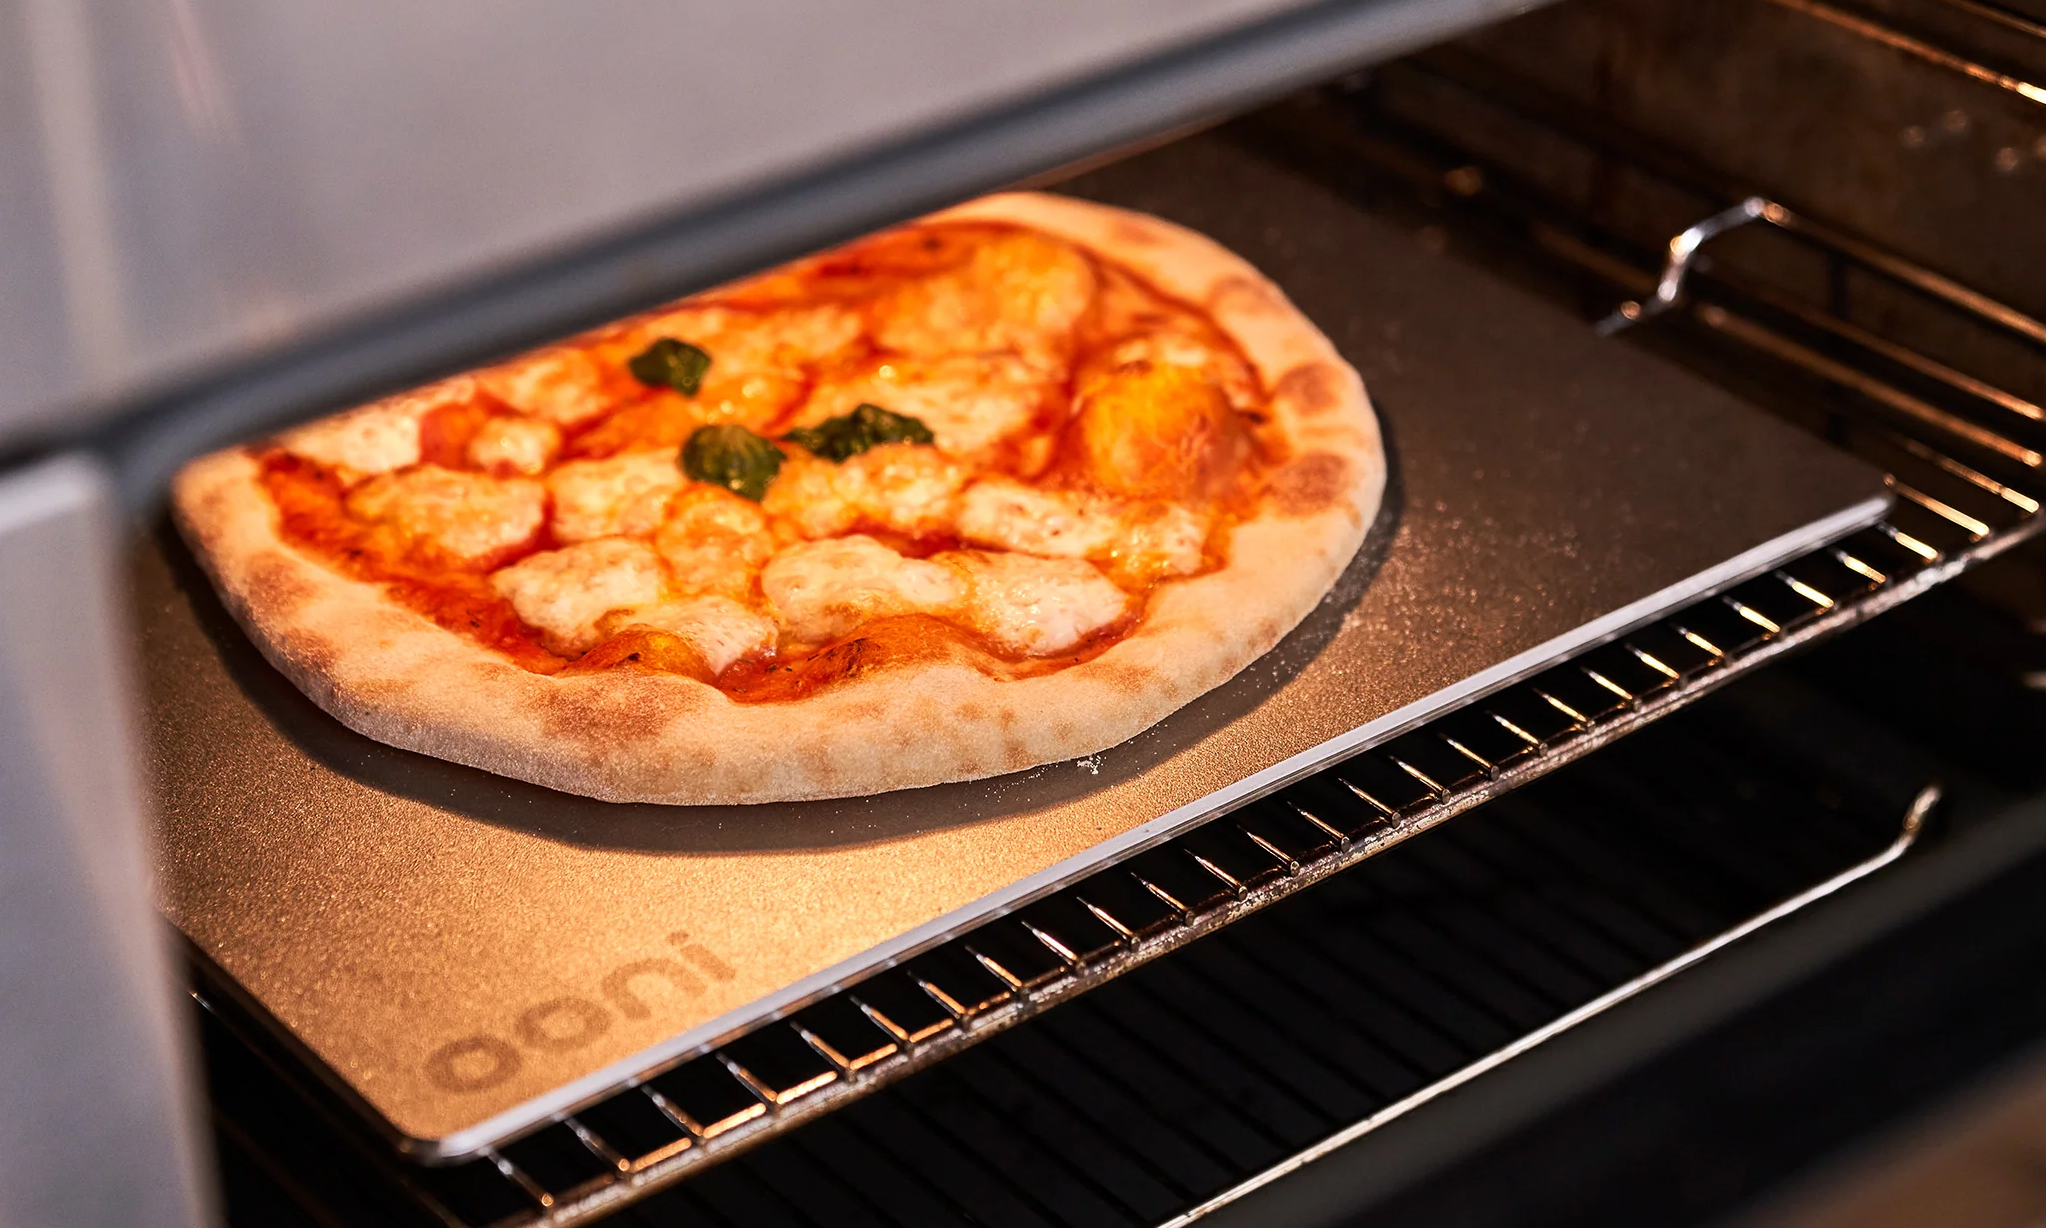 Ooni Black Friday deals include up to 30 percent off pizza ovens and accessories